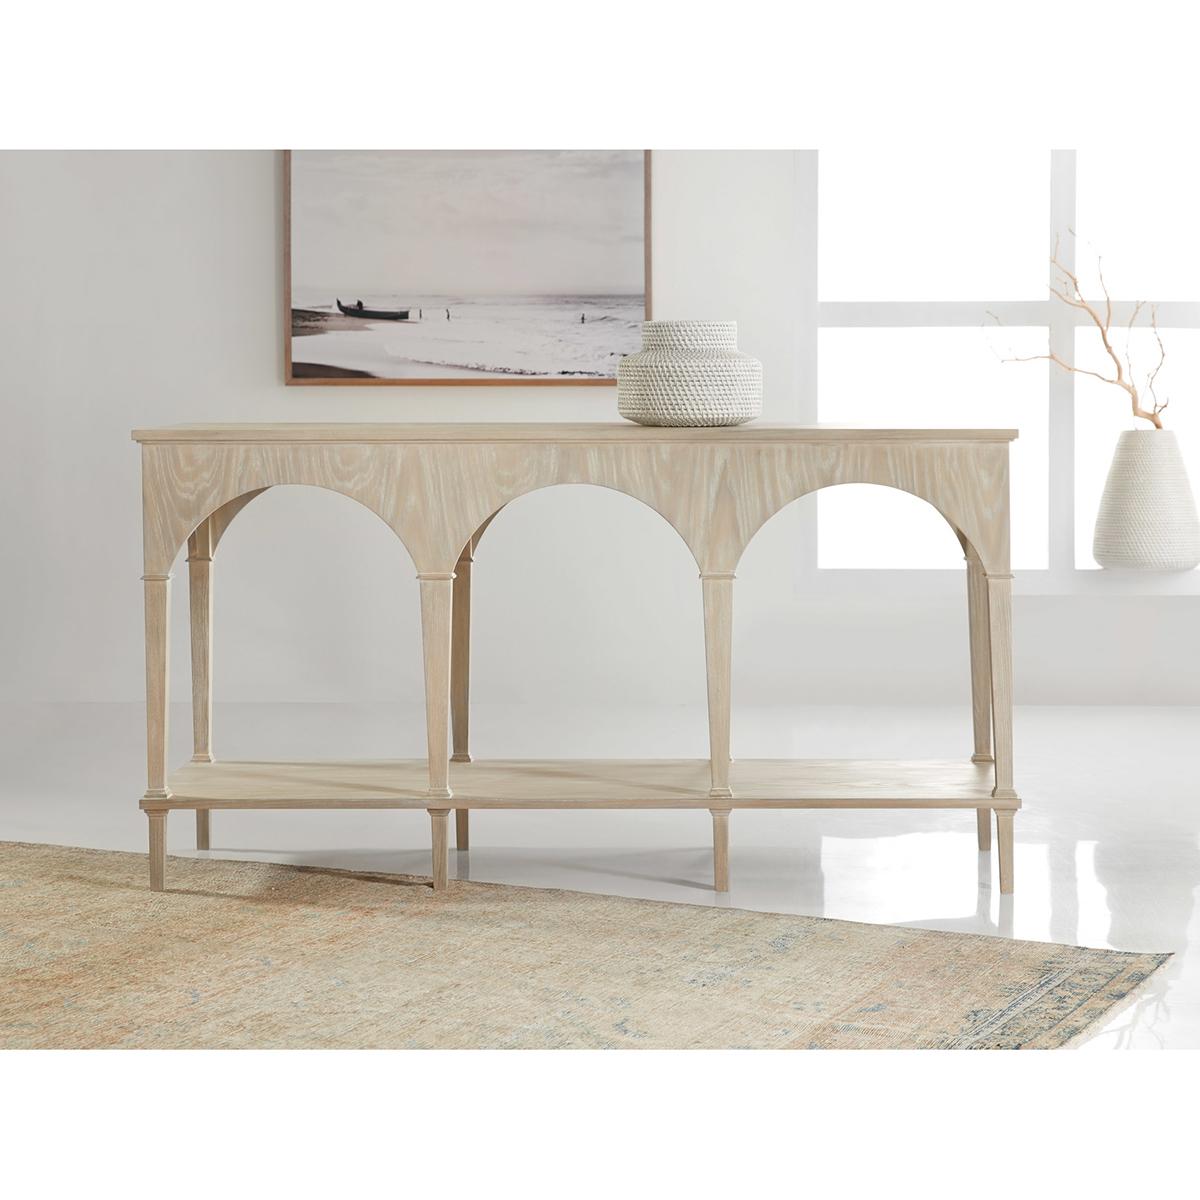 Modern Console Table with a light whitewashed ash veneer. The large modern table takes design cues from the 18th-century Gothic style with its arched doorway design. A rectangular table with eight tapered legs and a shelf stretcher